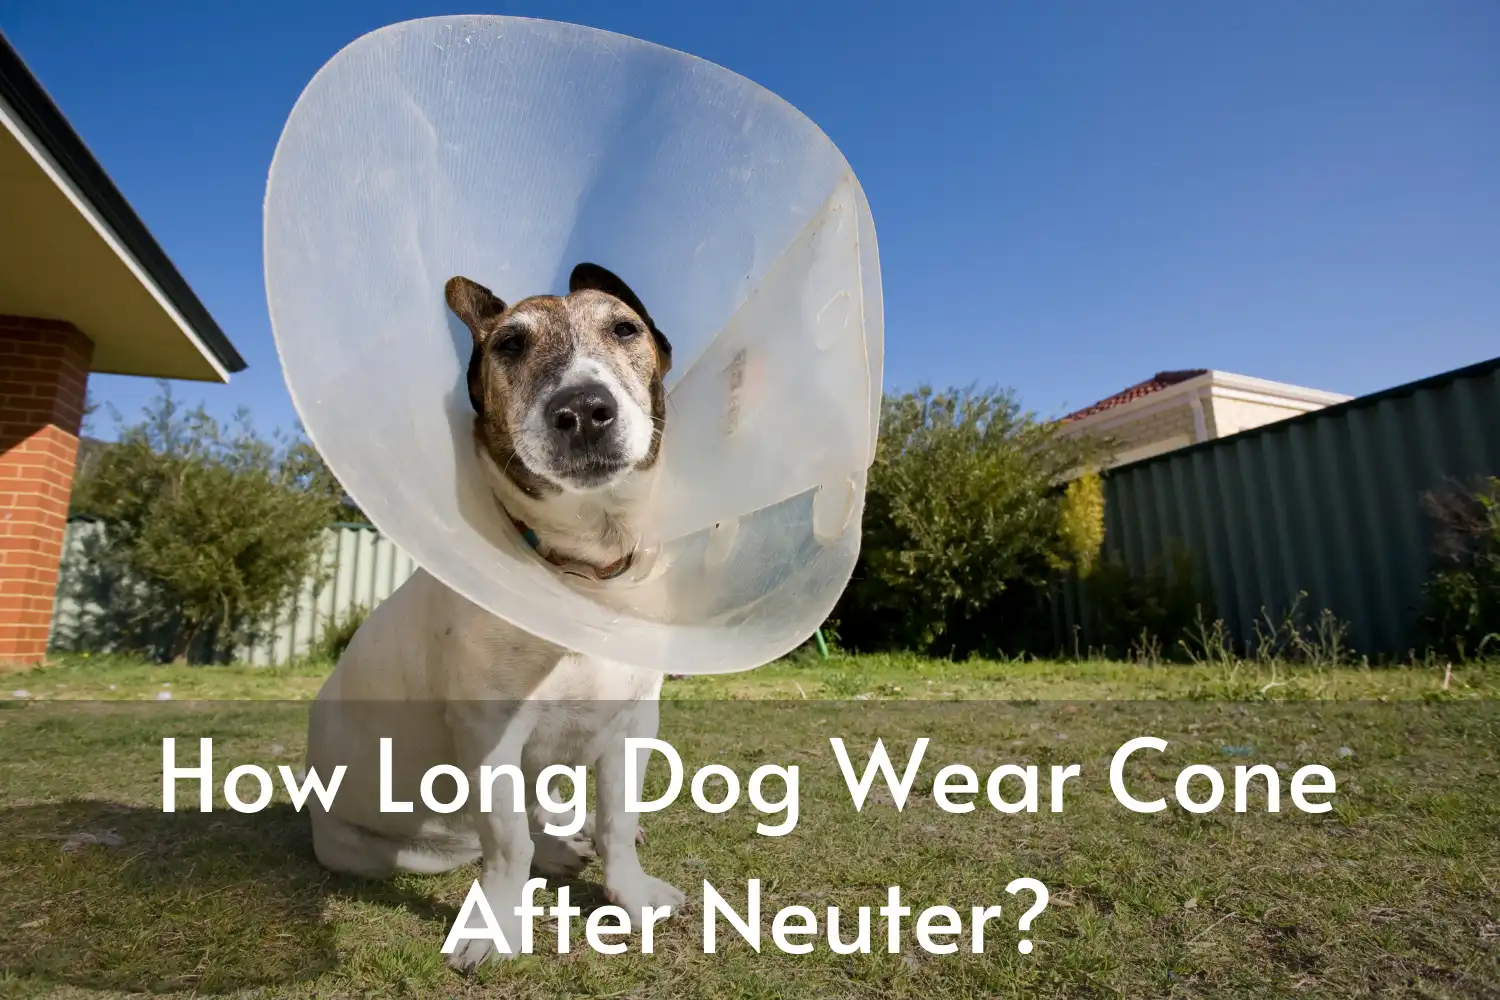 How Long Does Dog Wear Cone After Neuter?